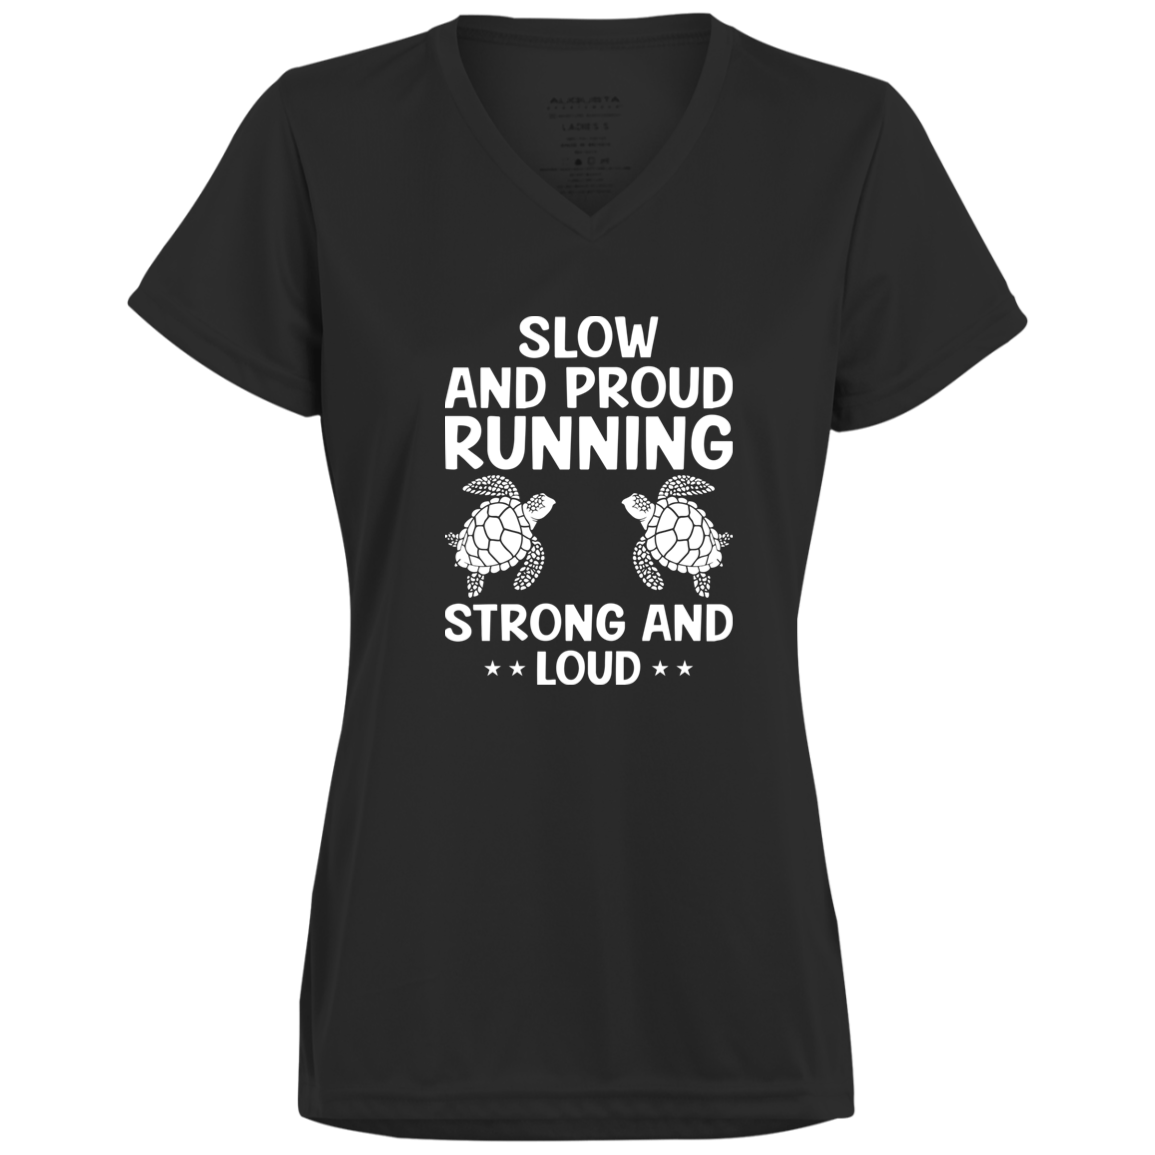 Women's Inspirational Top Slow And Proud, Running Strong And Loud